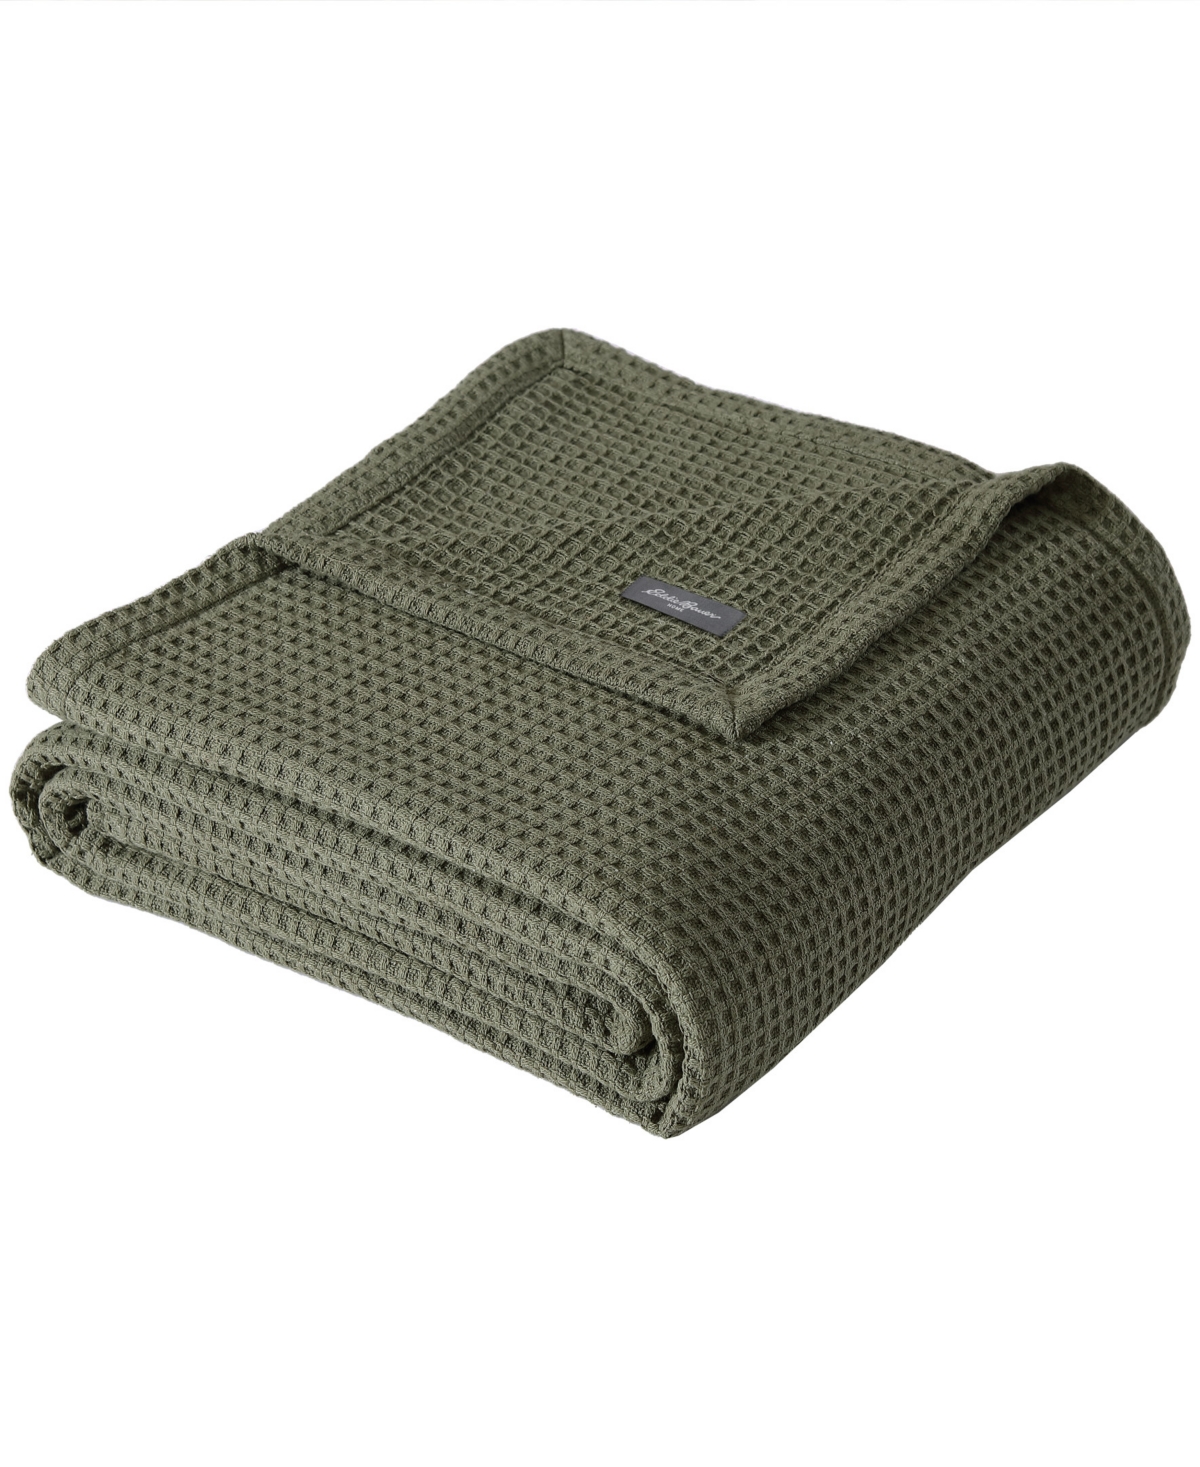 Eddie Bauer Solid Waffle Cotton Reversible Blanket, Full/queen In Olive Green